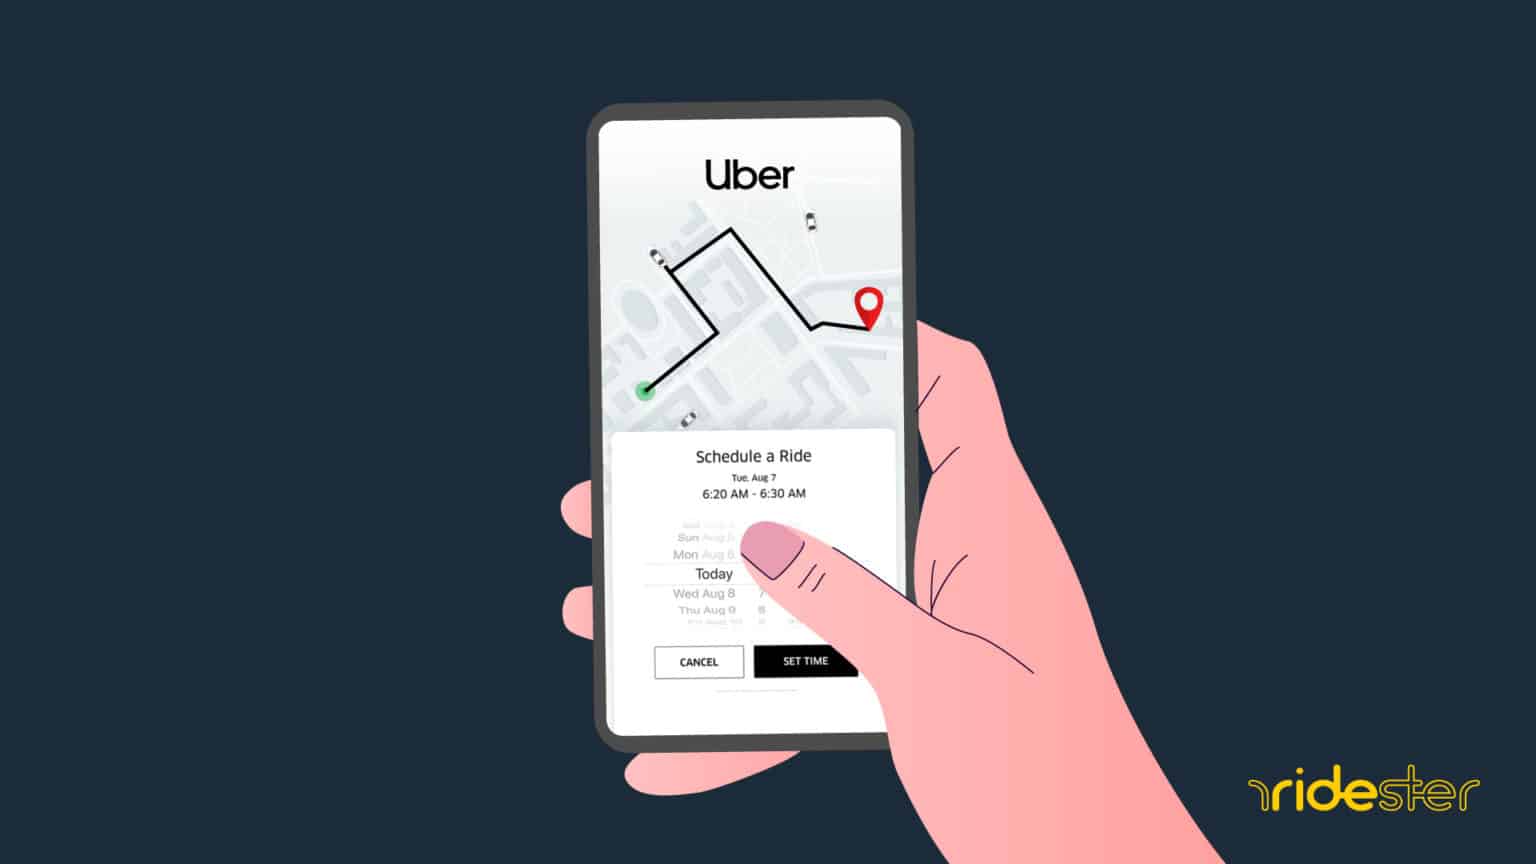 How To Schedule Uber Rides In Advance